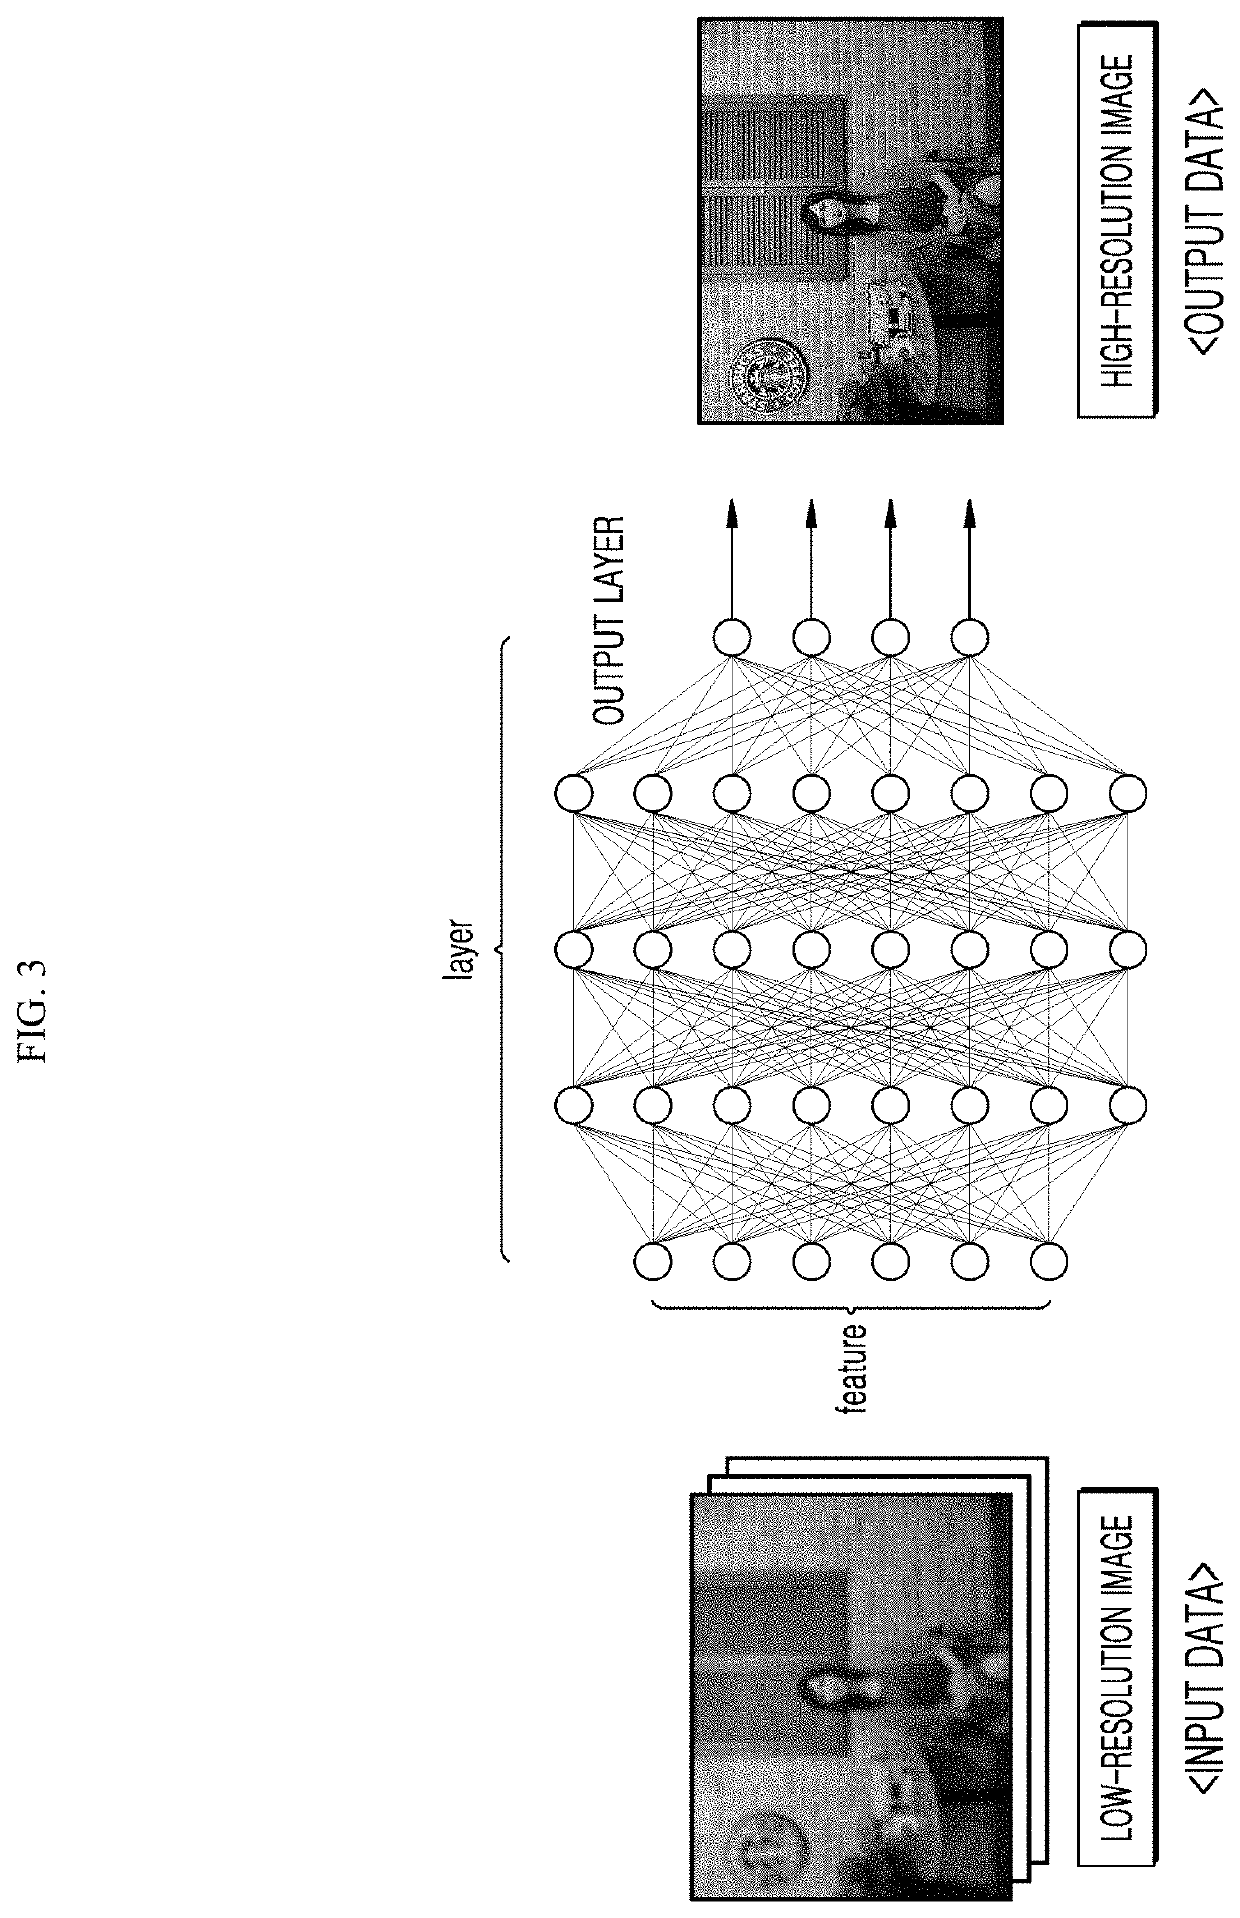 Method and apparatus for enhancing image resolution